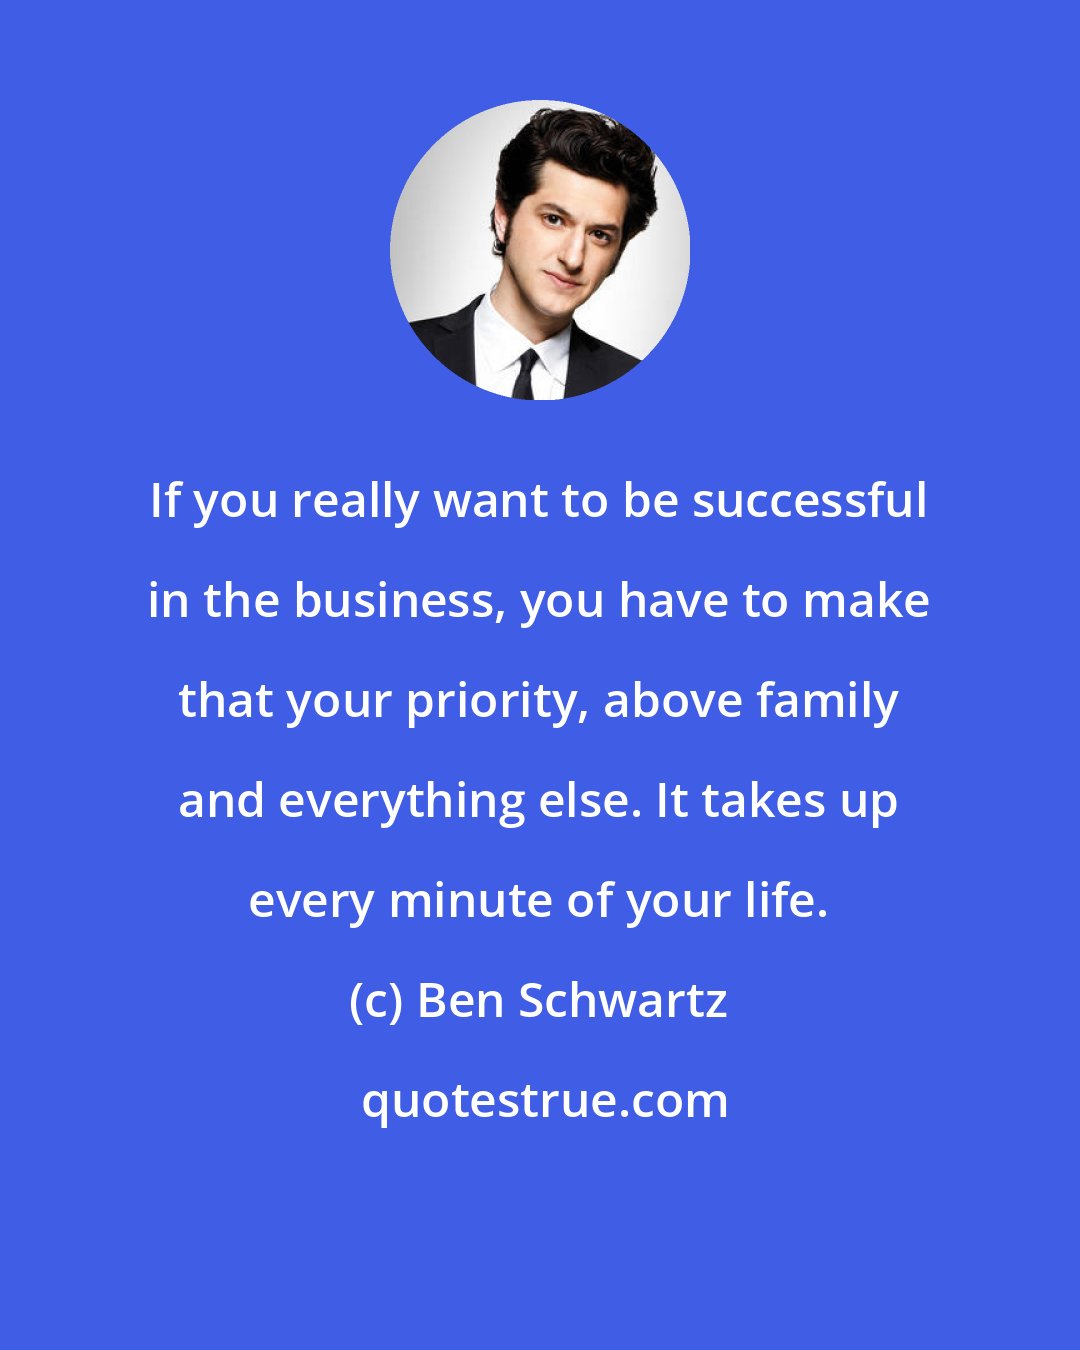 Ben Schwartz: If you really want to be successful in the business, you have to make that your priority, above family and everything else. It takes up every minute of your life.